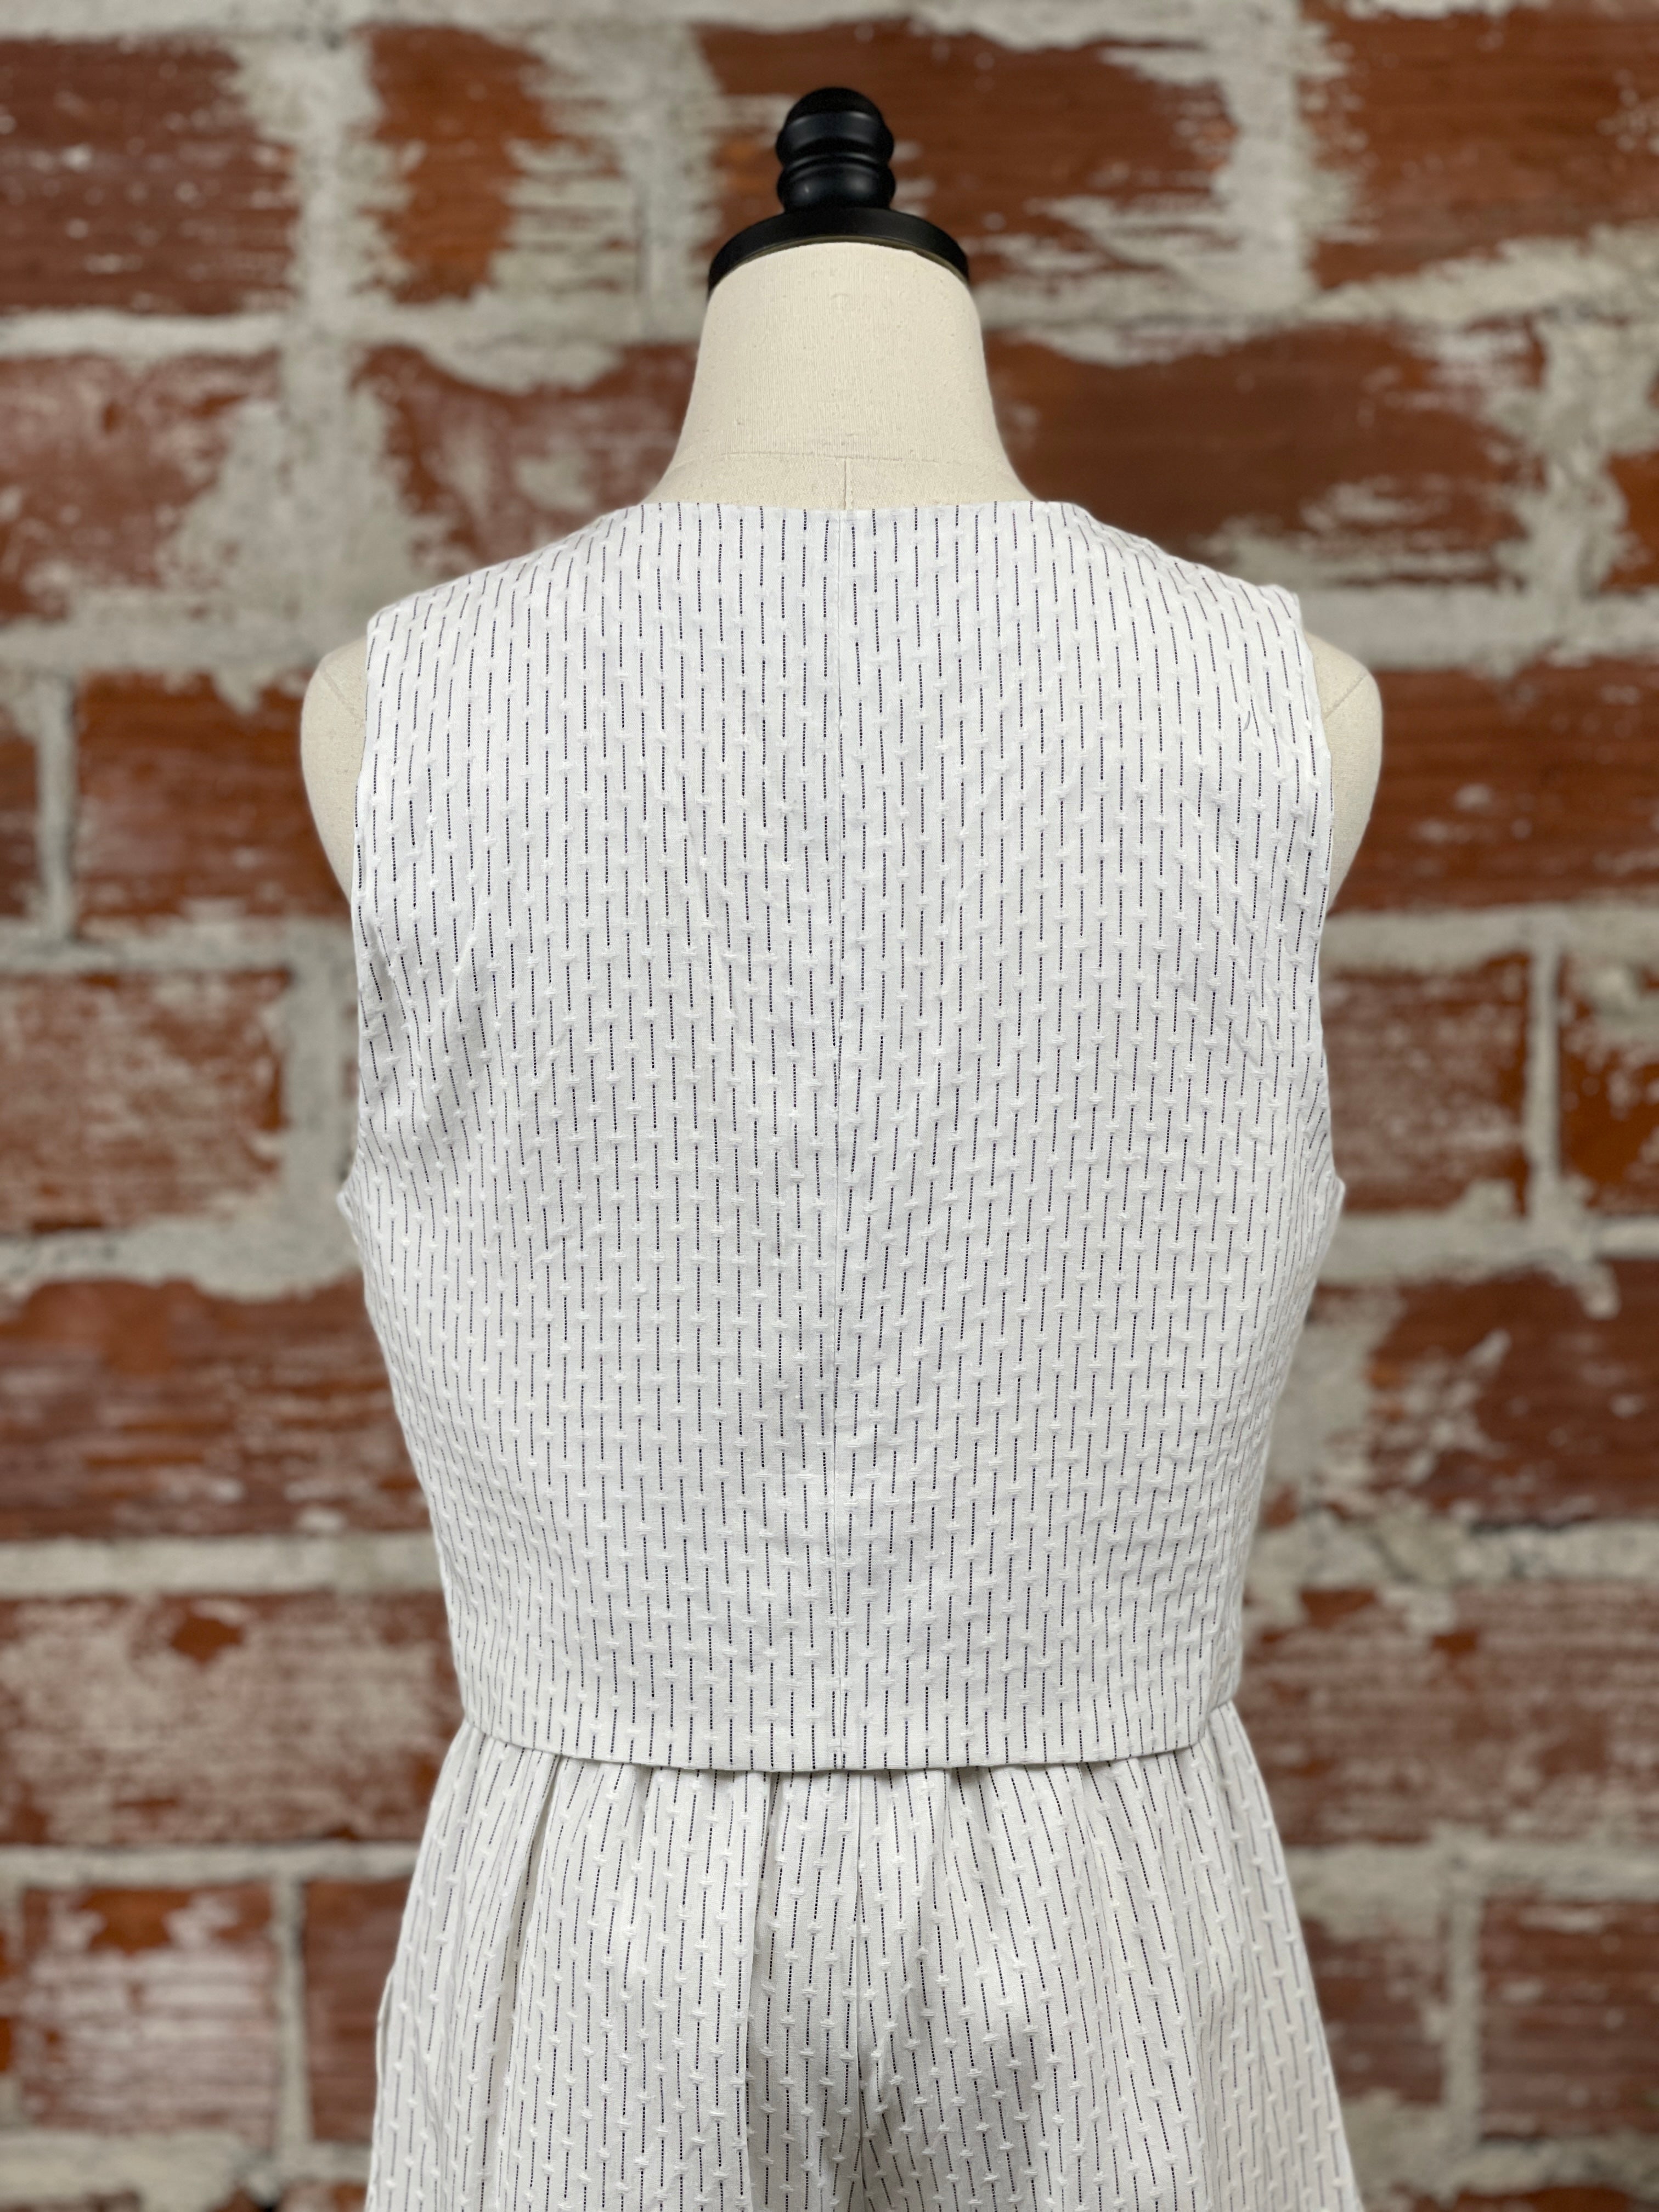 Lizzy Button Front Vest in Off White and Black-112 - Woven Top S/S (Jan - June)-Little Bird Boutique